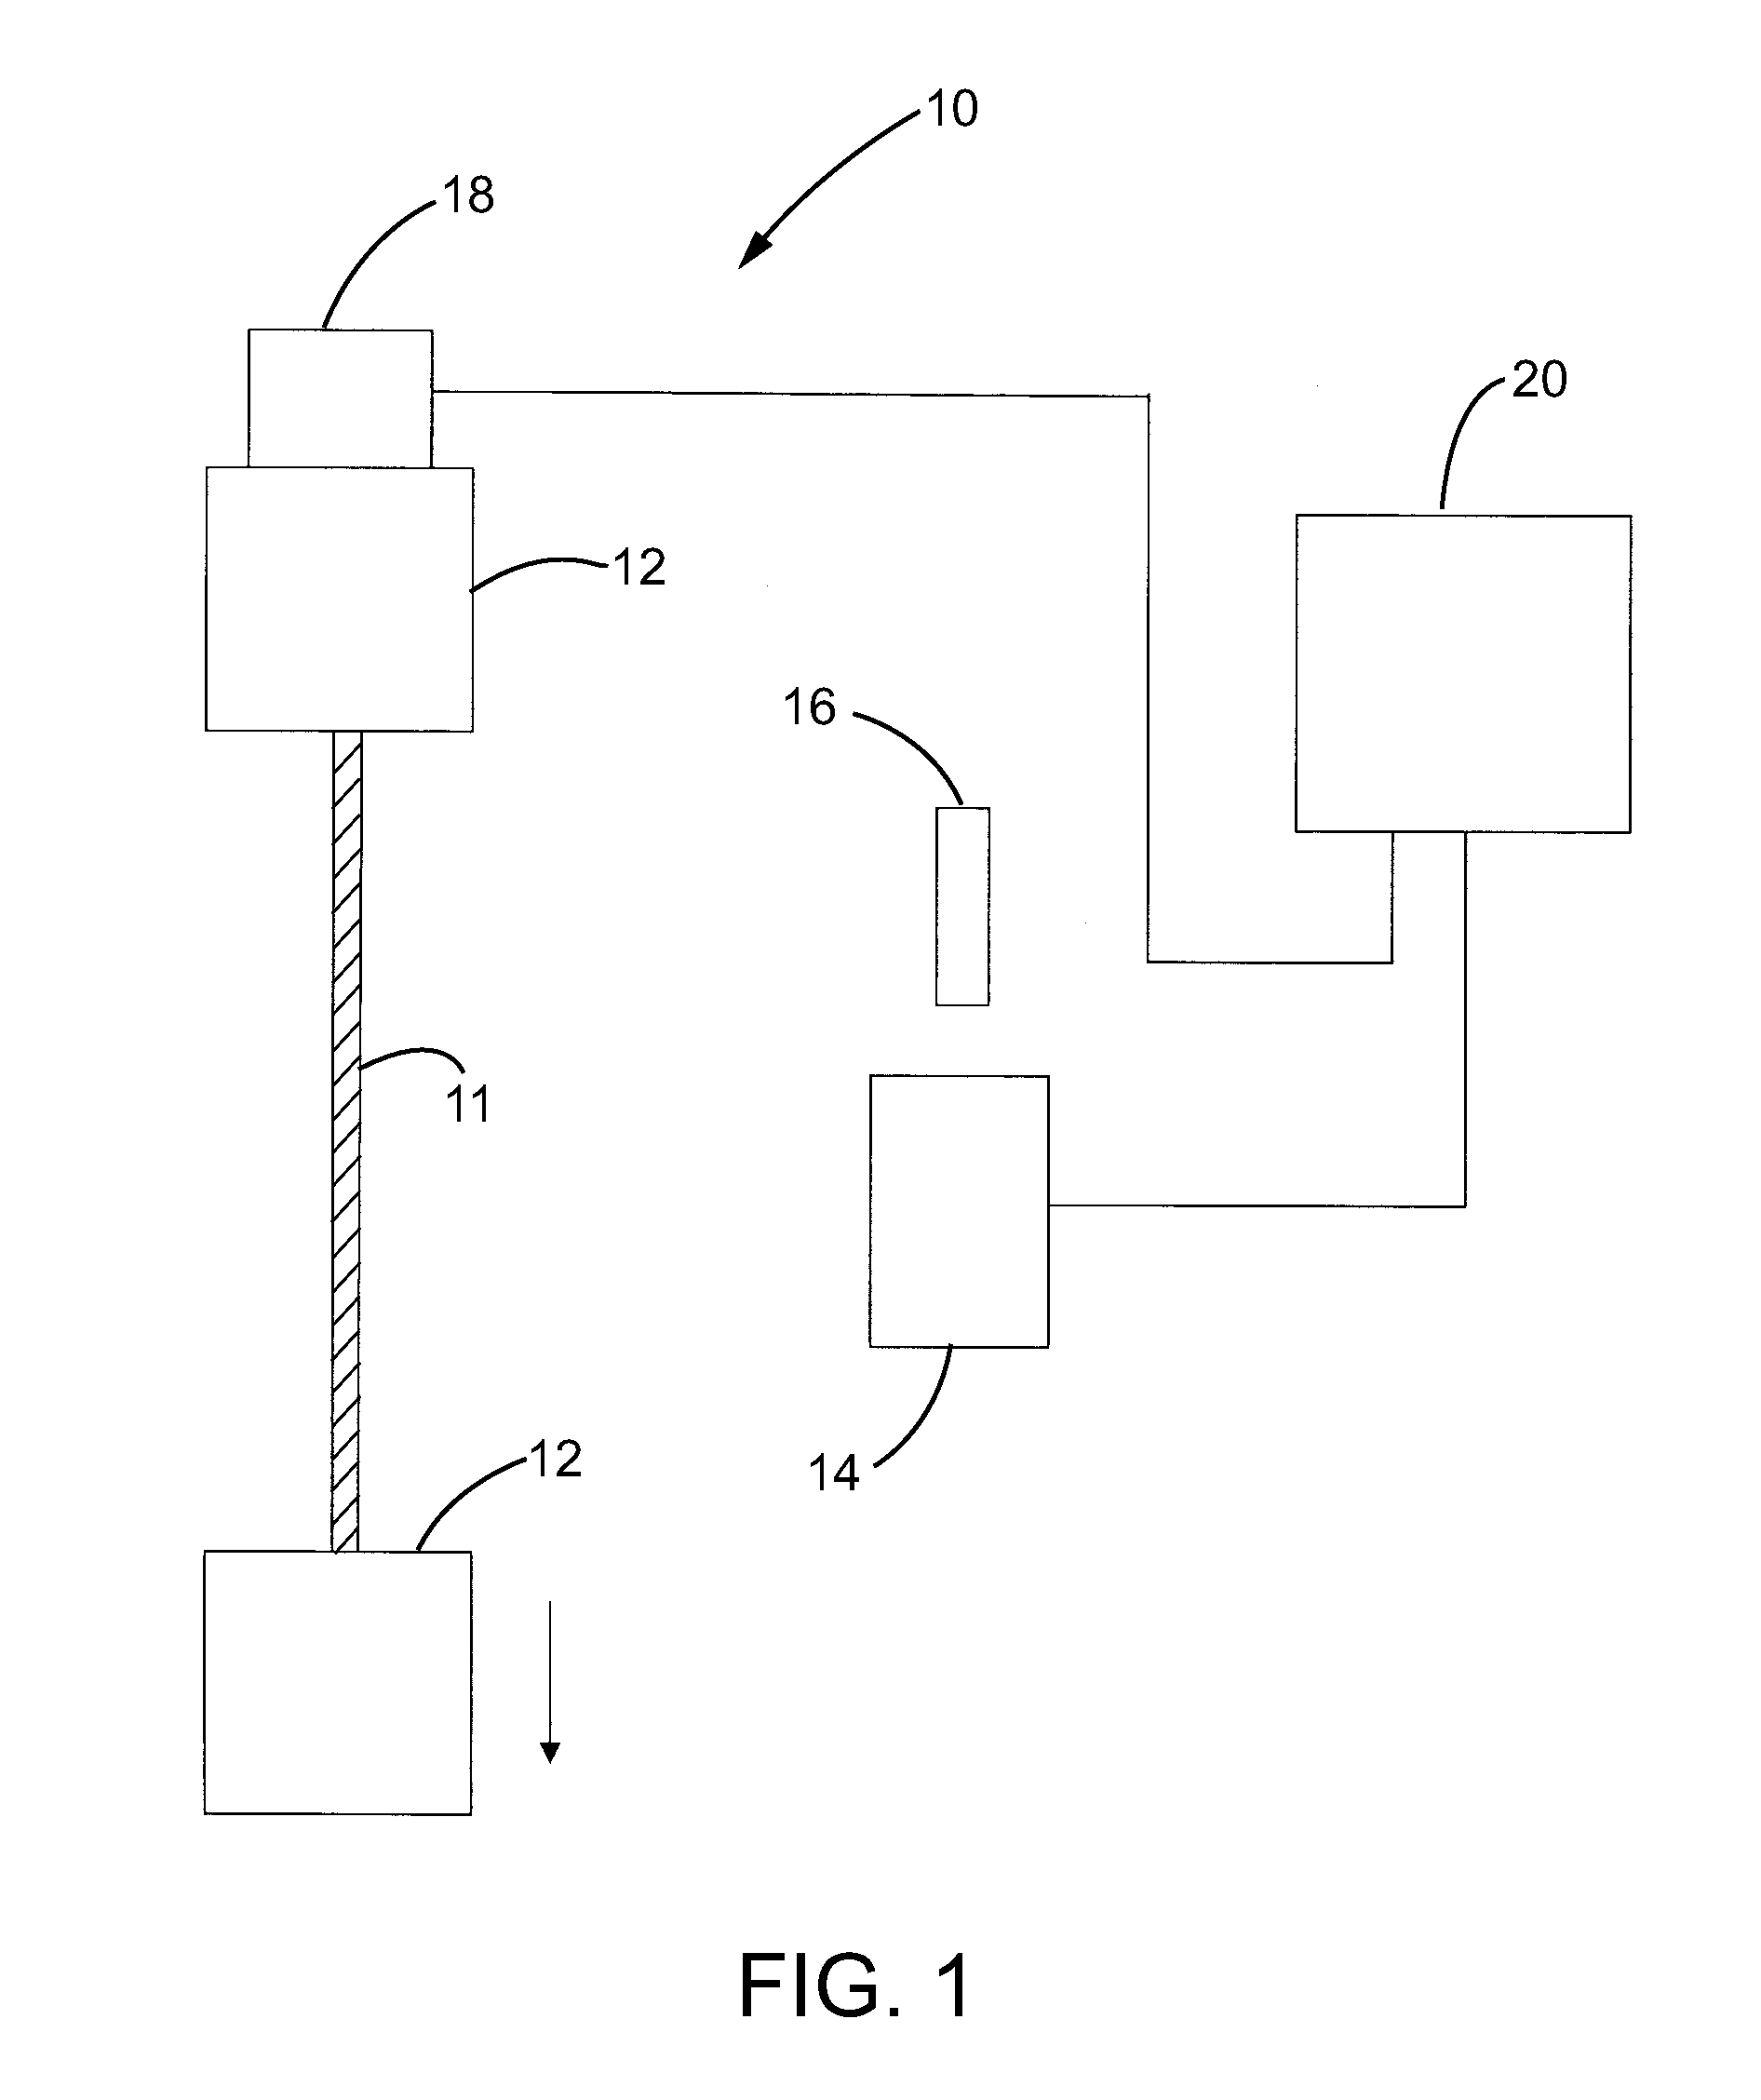 Method and system for measuring strain in twisted cord